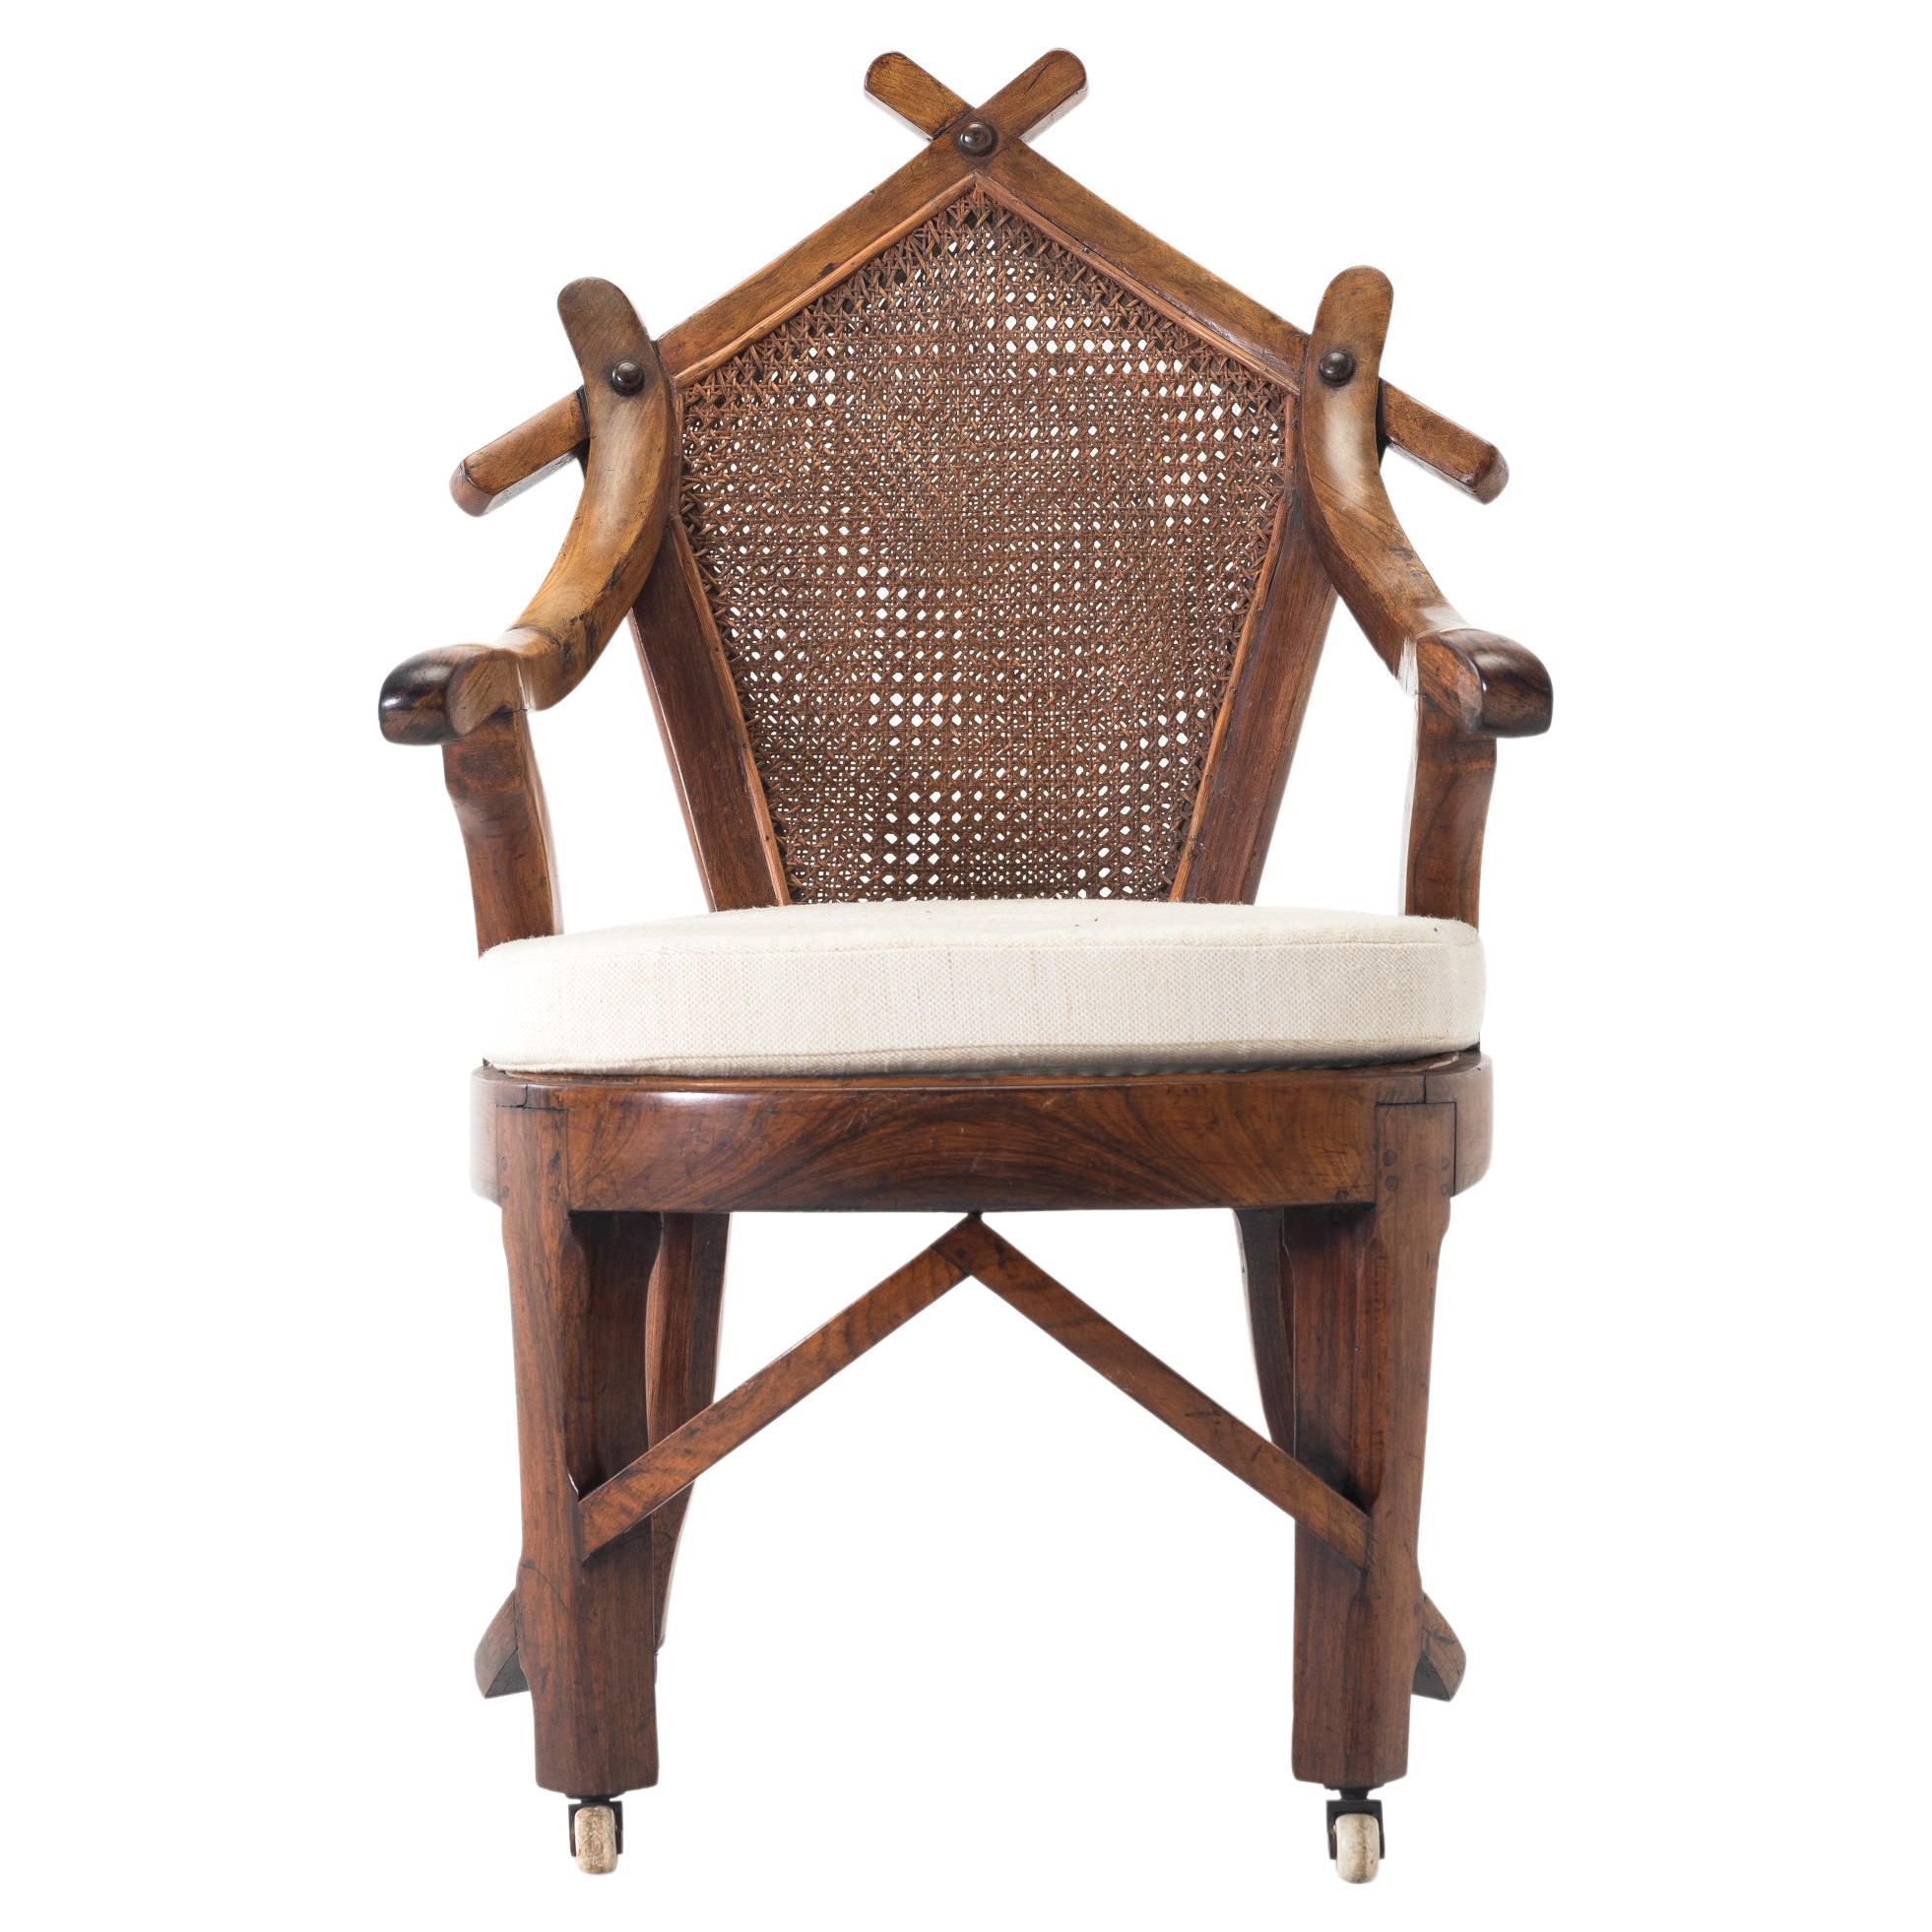 19th Century Walnut and Cane Chair